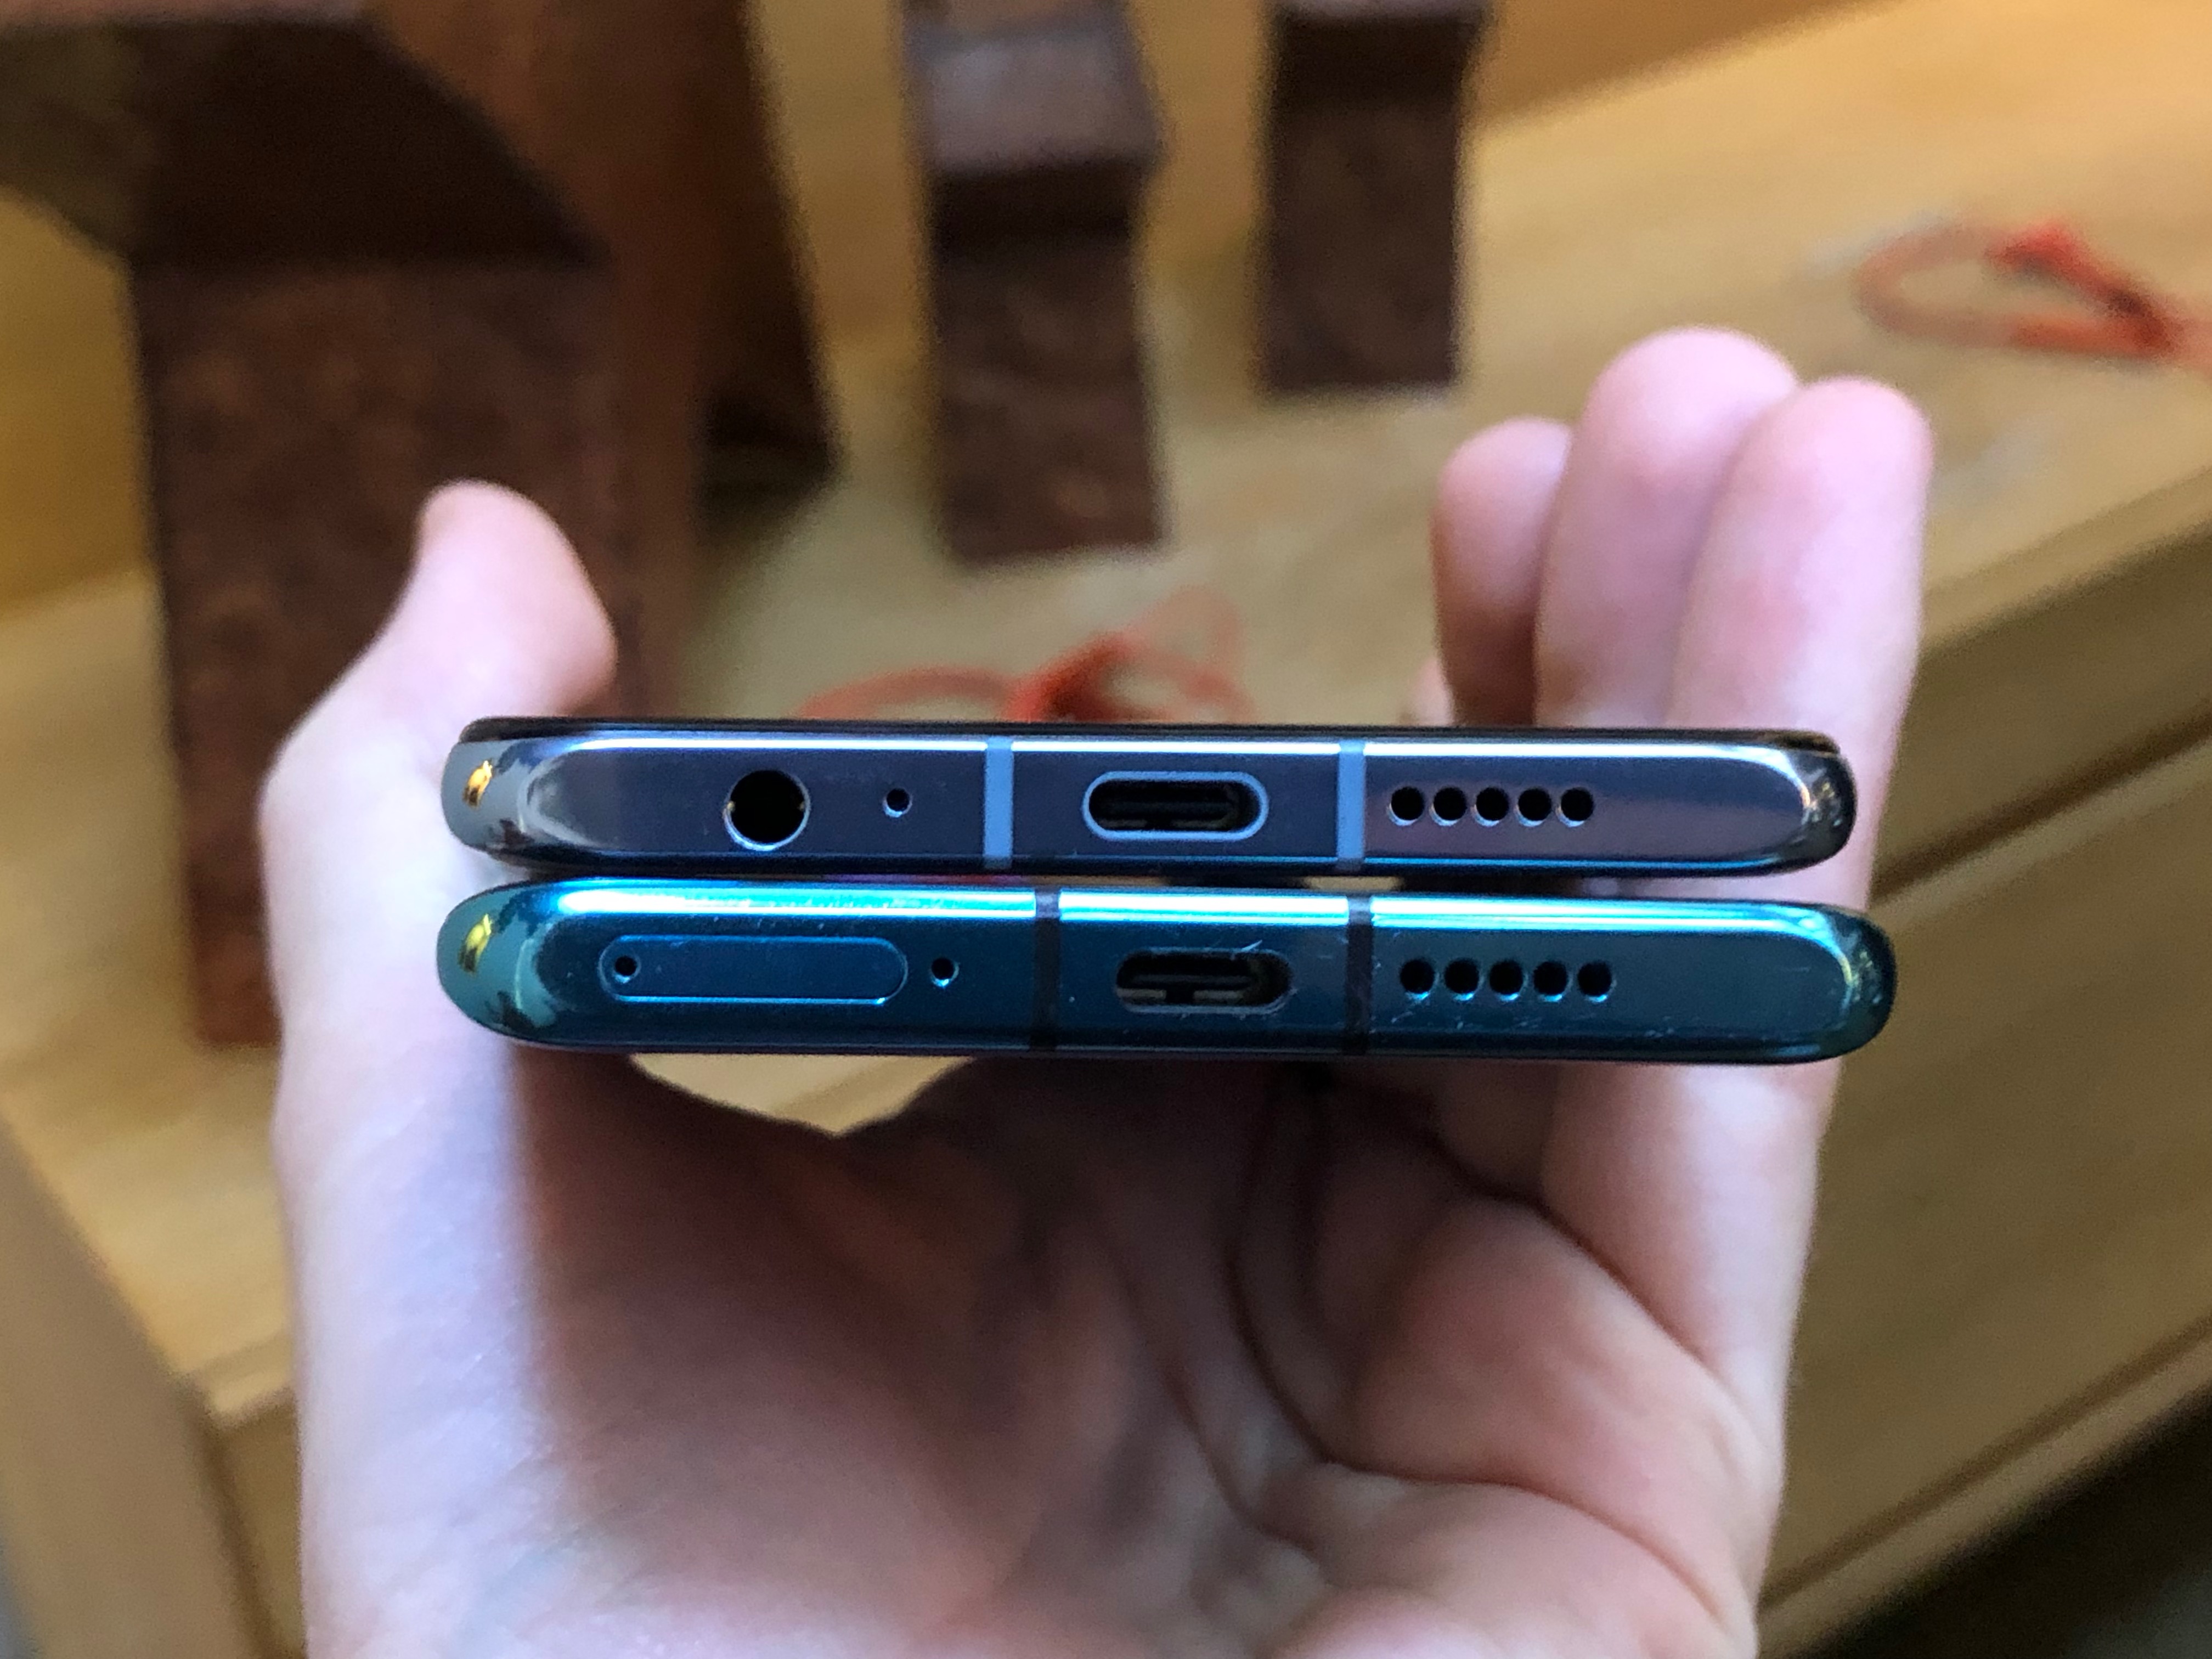 Huawei unveils the P30 and P30 Pro